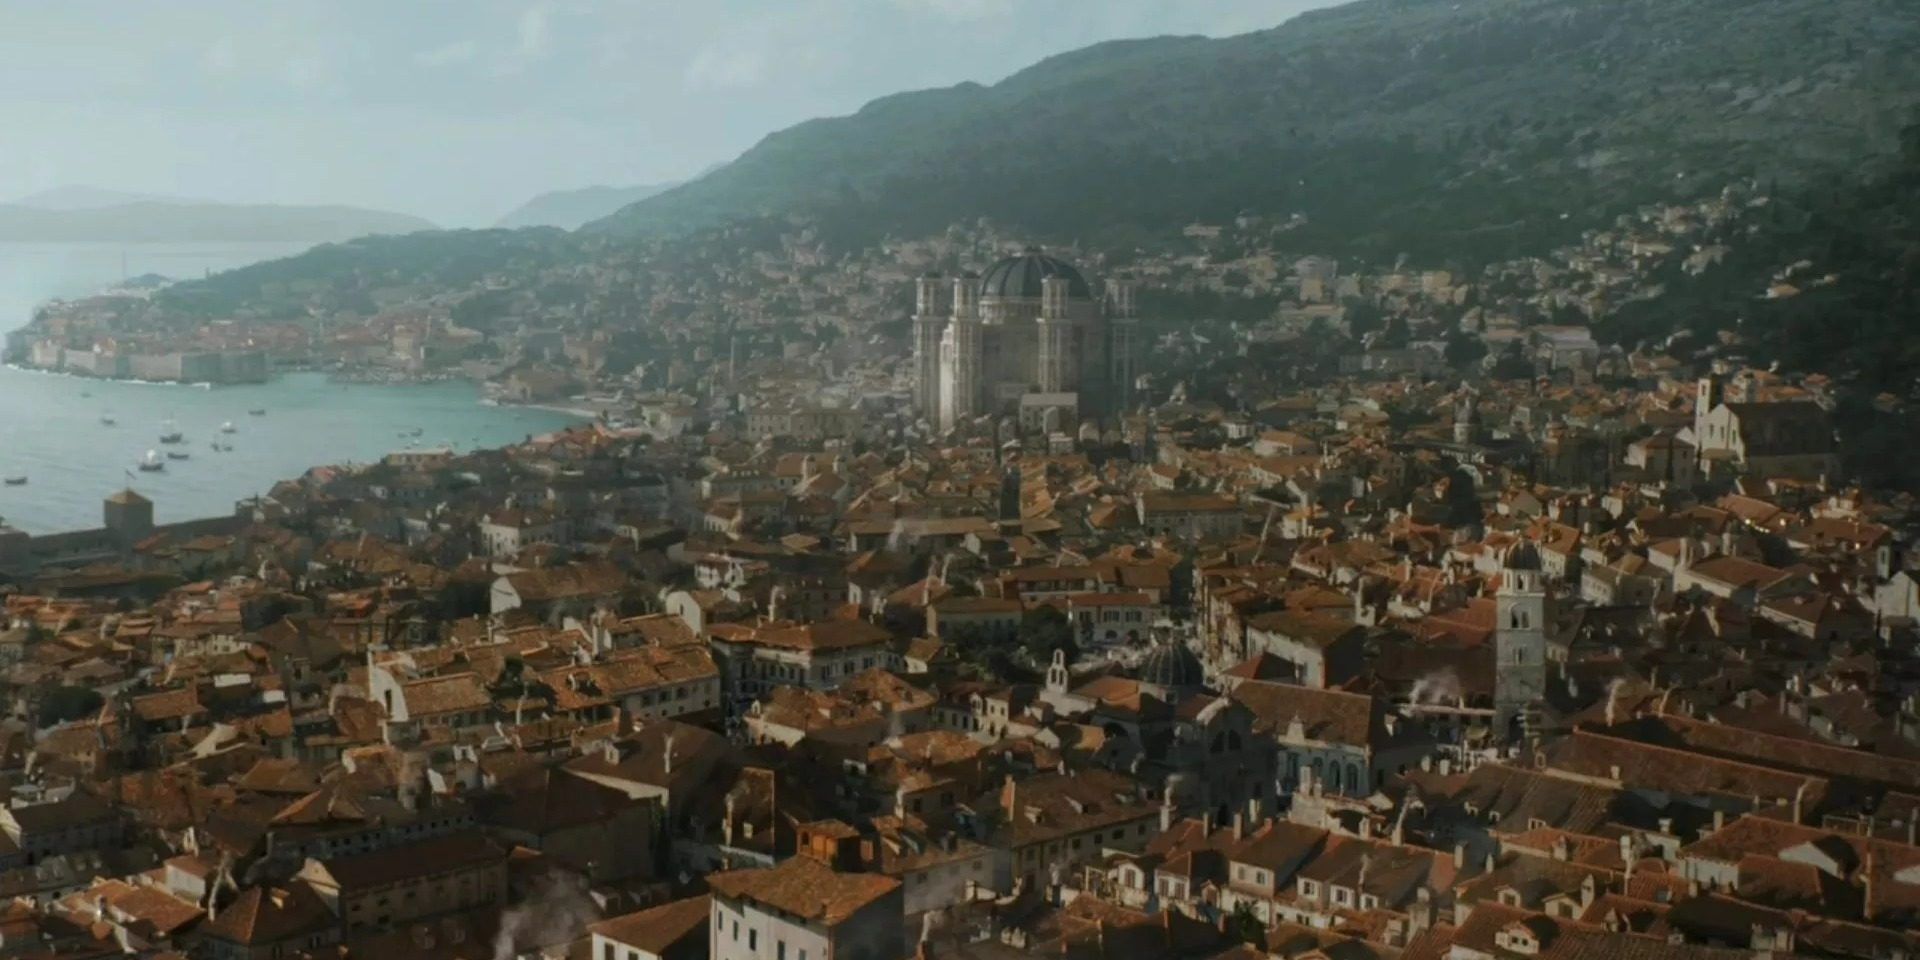 An aerial view of King's Landing from Game of Thrones